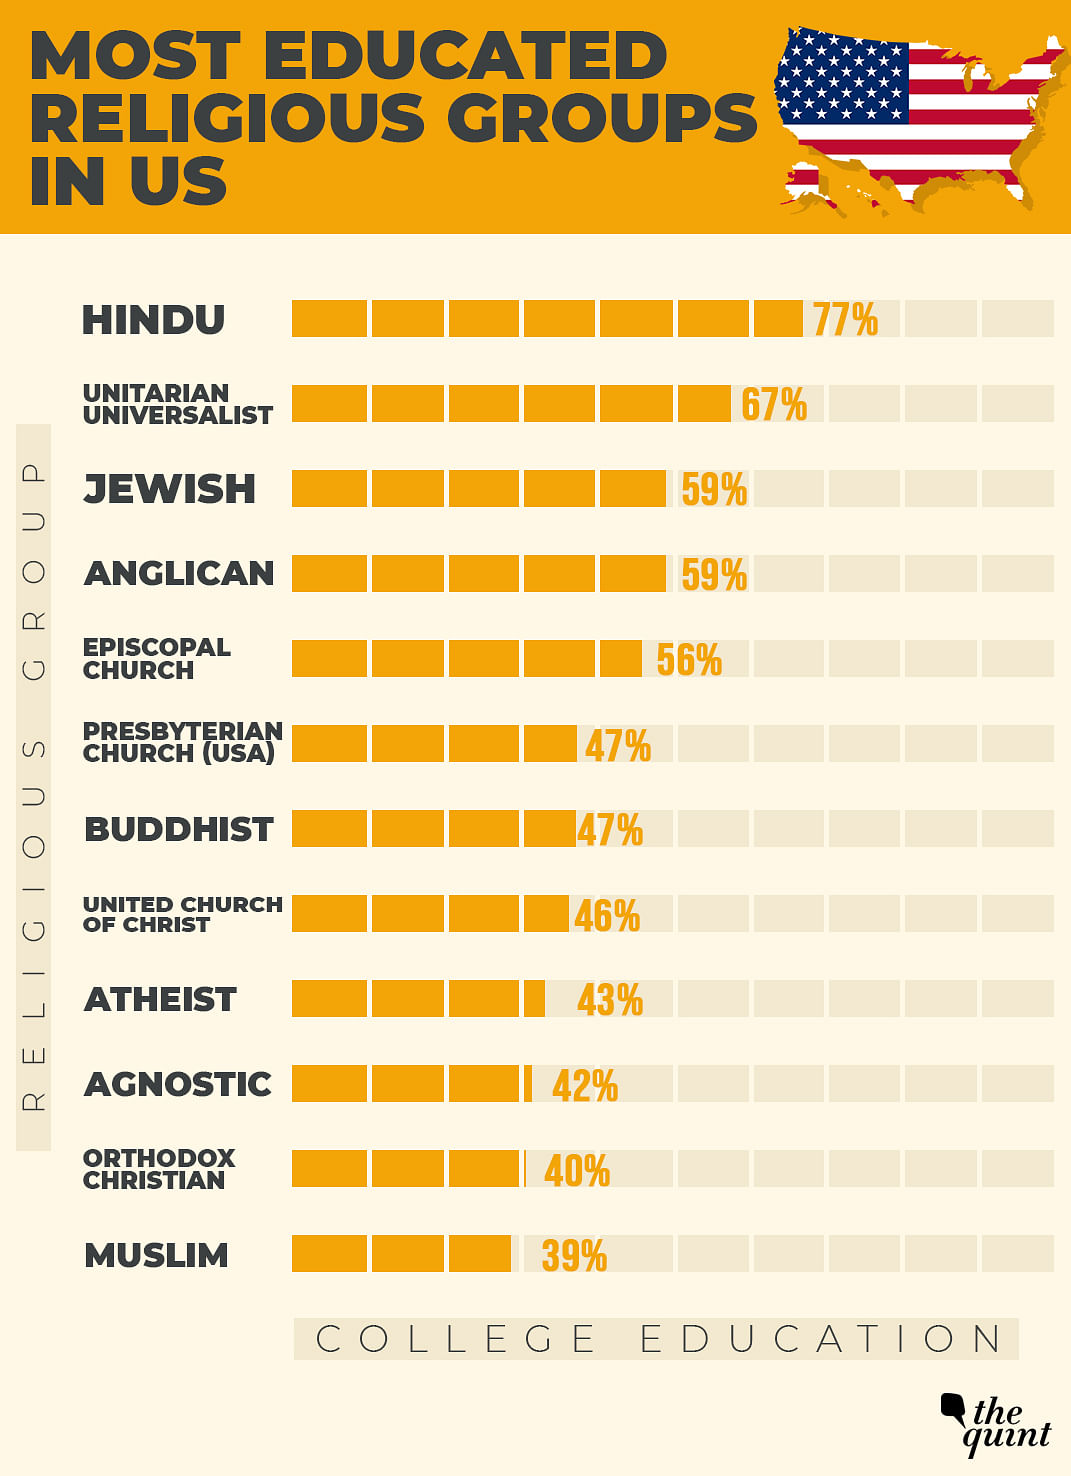 The Hindu community is the most educated among 30 religious groups in the United States, says a Pew study.